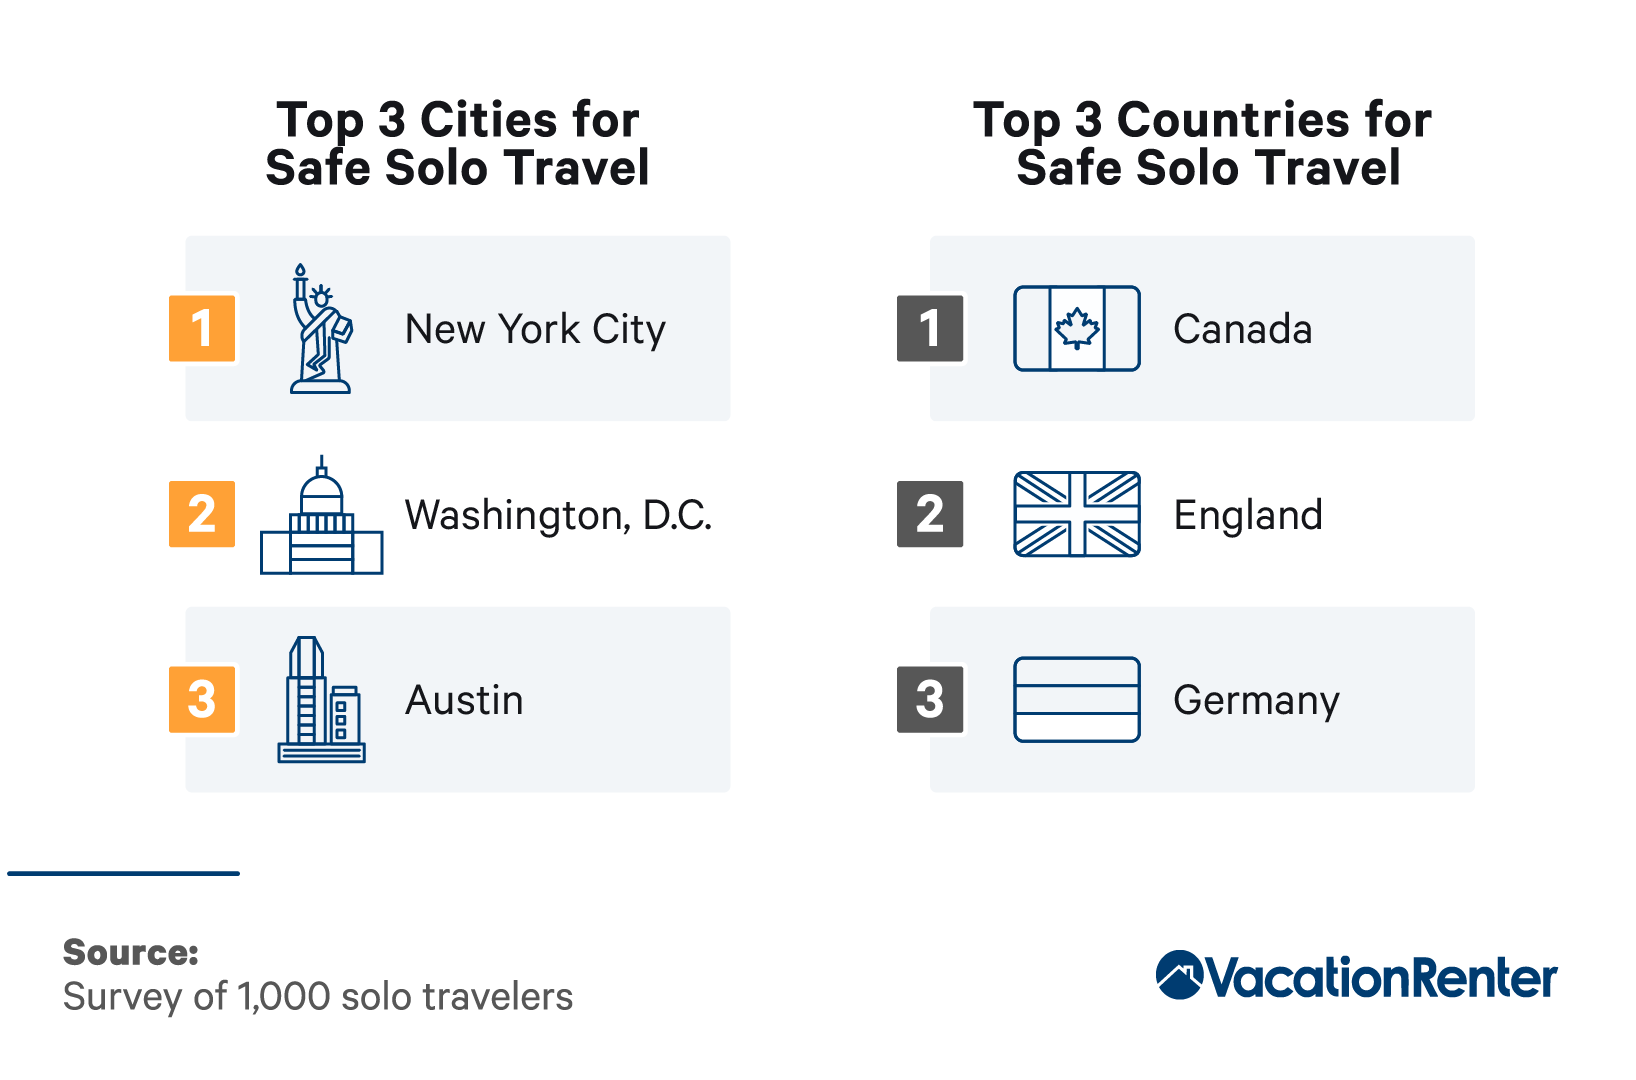 Top three cities and countries for traveling alone